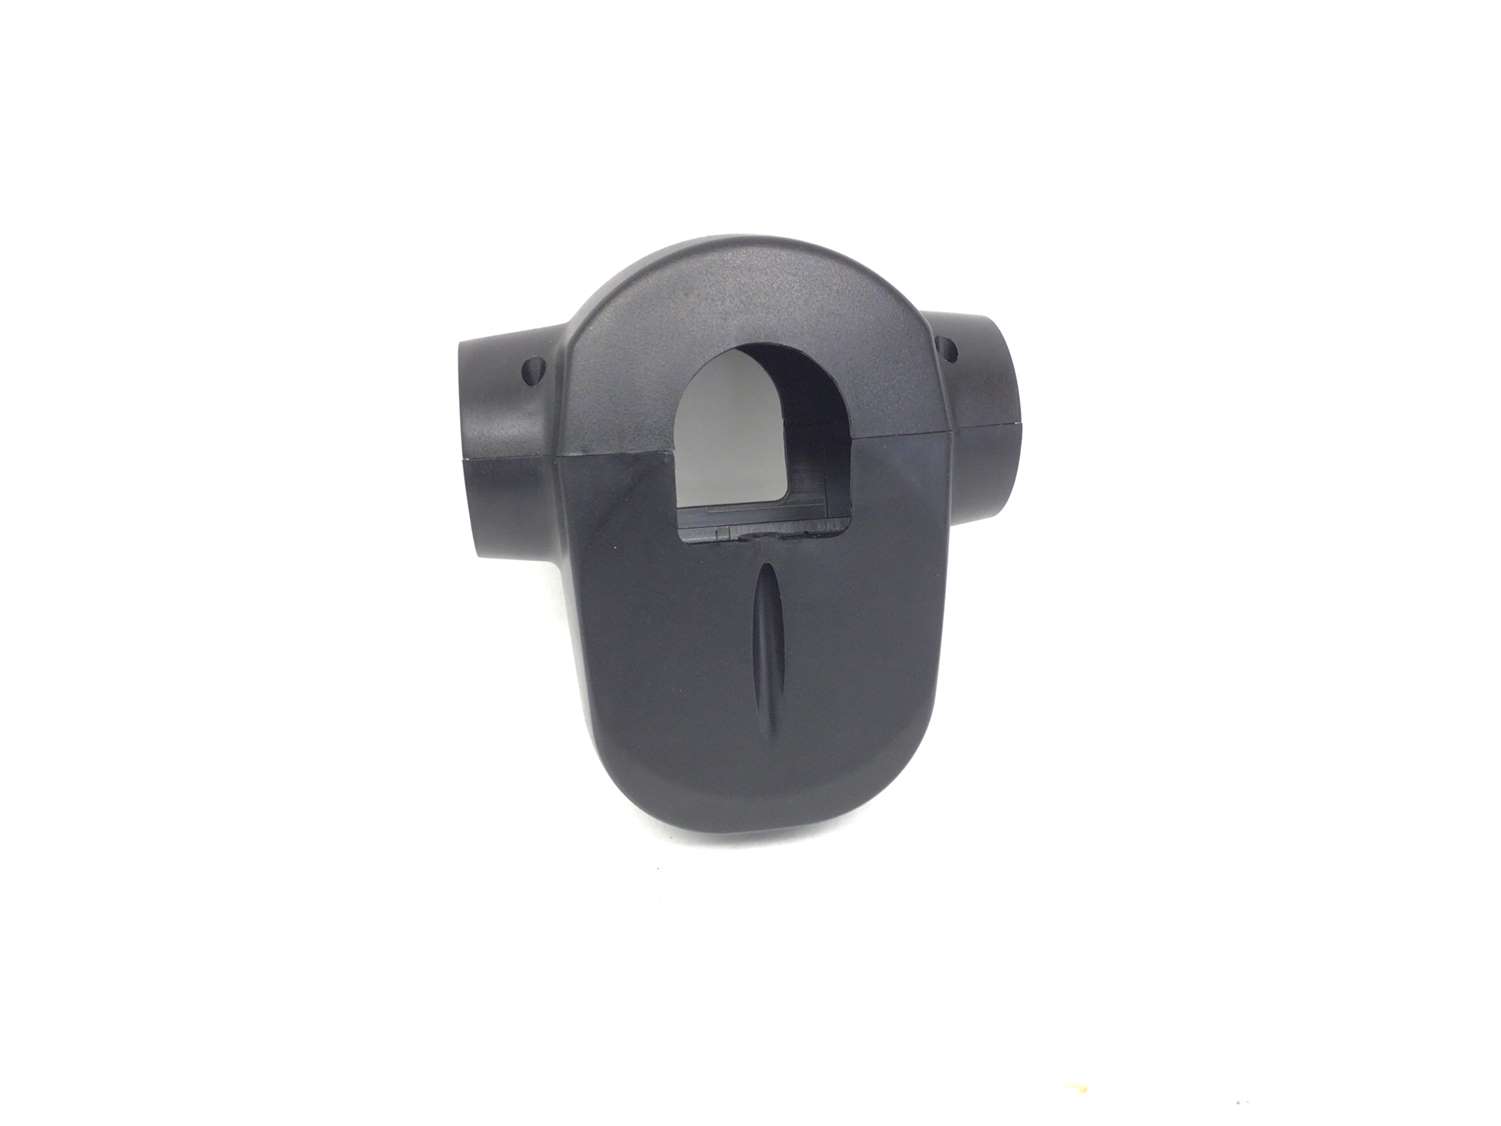 Left Axis Plastic Cover (Used)